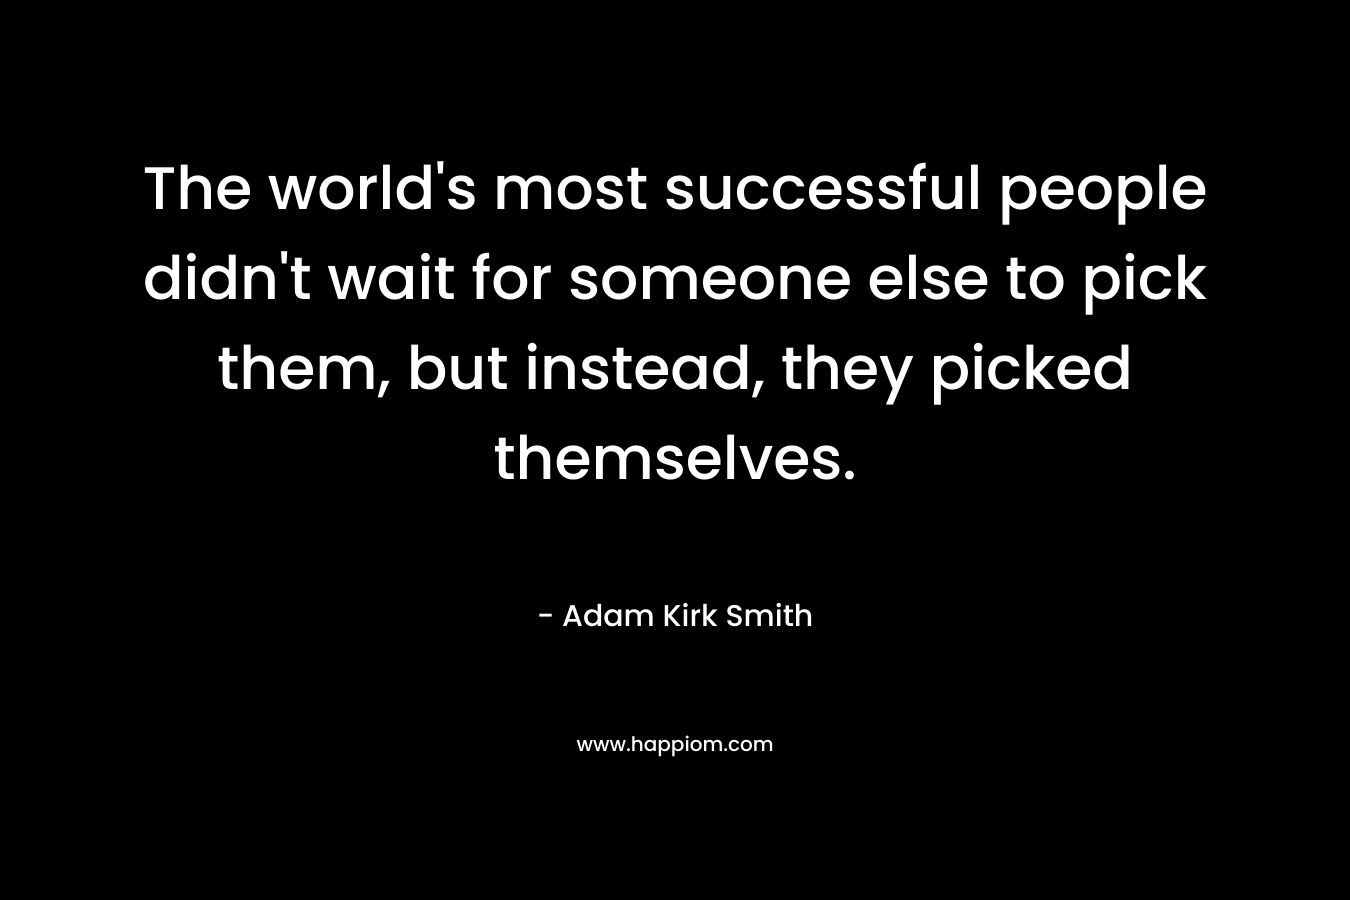 The world’s most successful people didn’t wait for someone else to pick them, but instead, they picked themselves. – Adam Kirk Smith